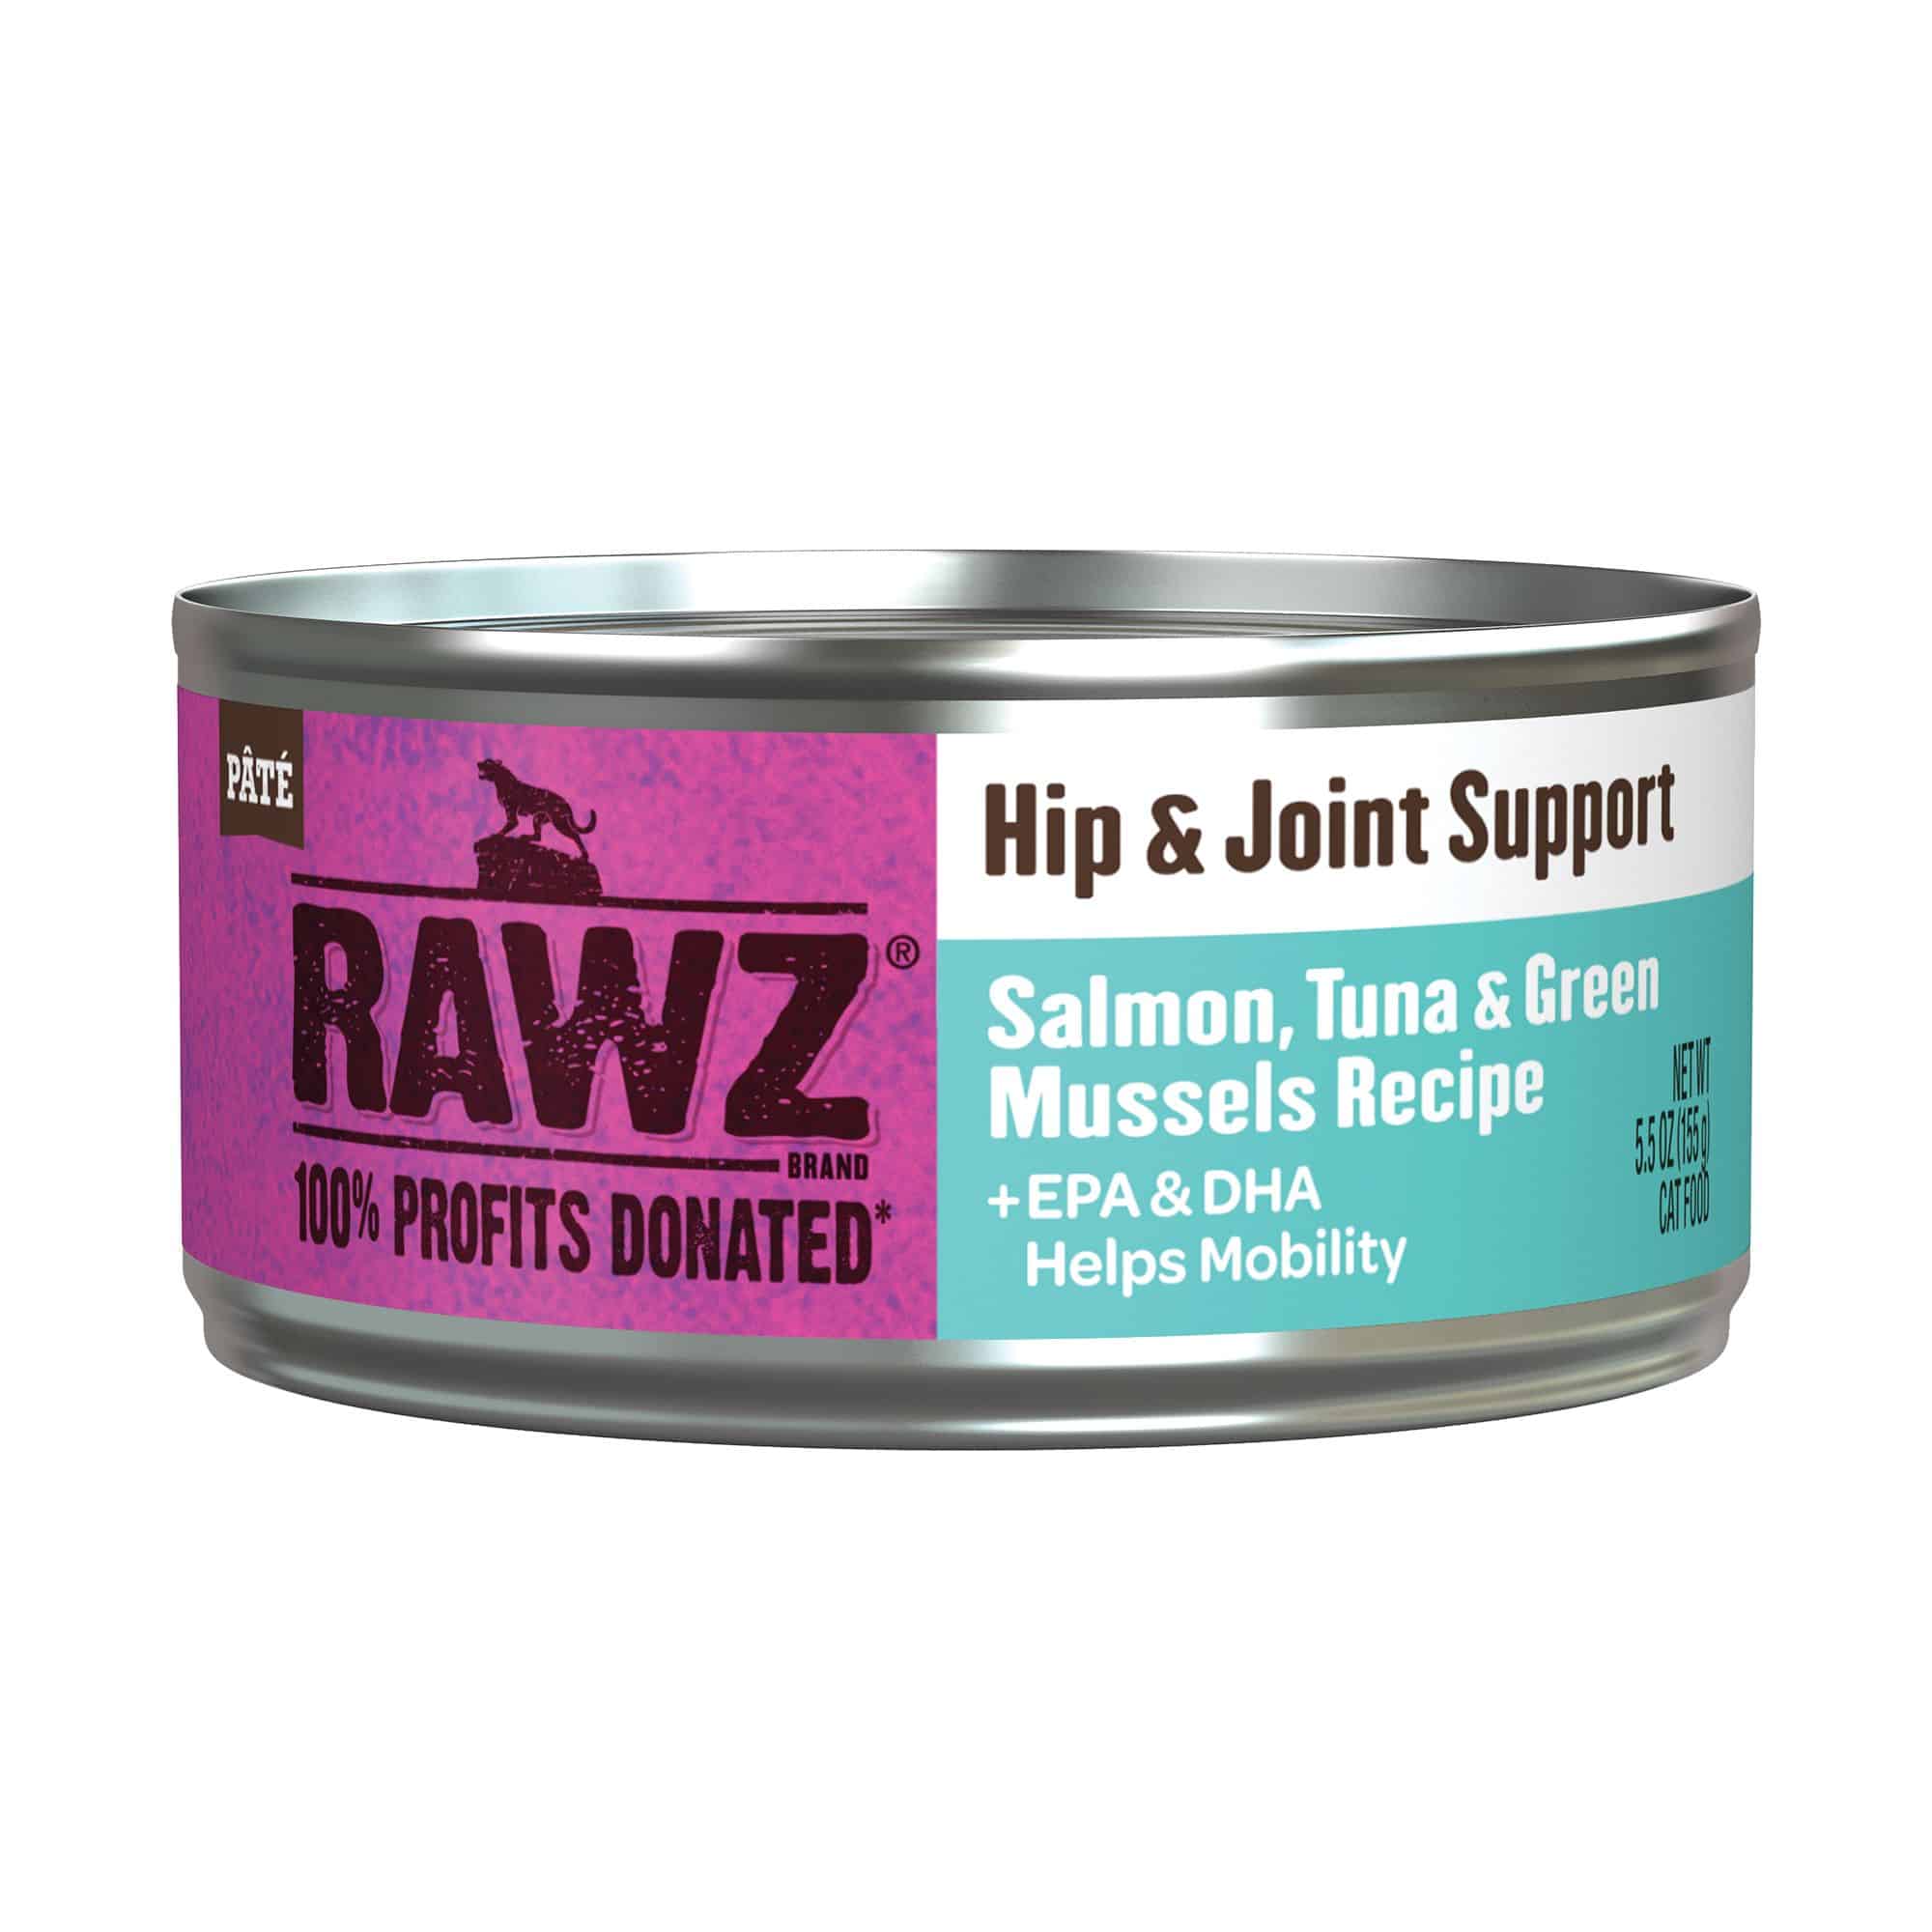 RAWZ - Hip & Joint Support Salmon, Tuna & Green Mussels (Wet Cat Food)